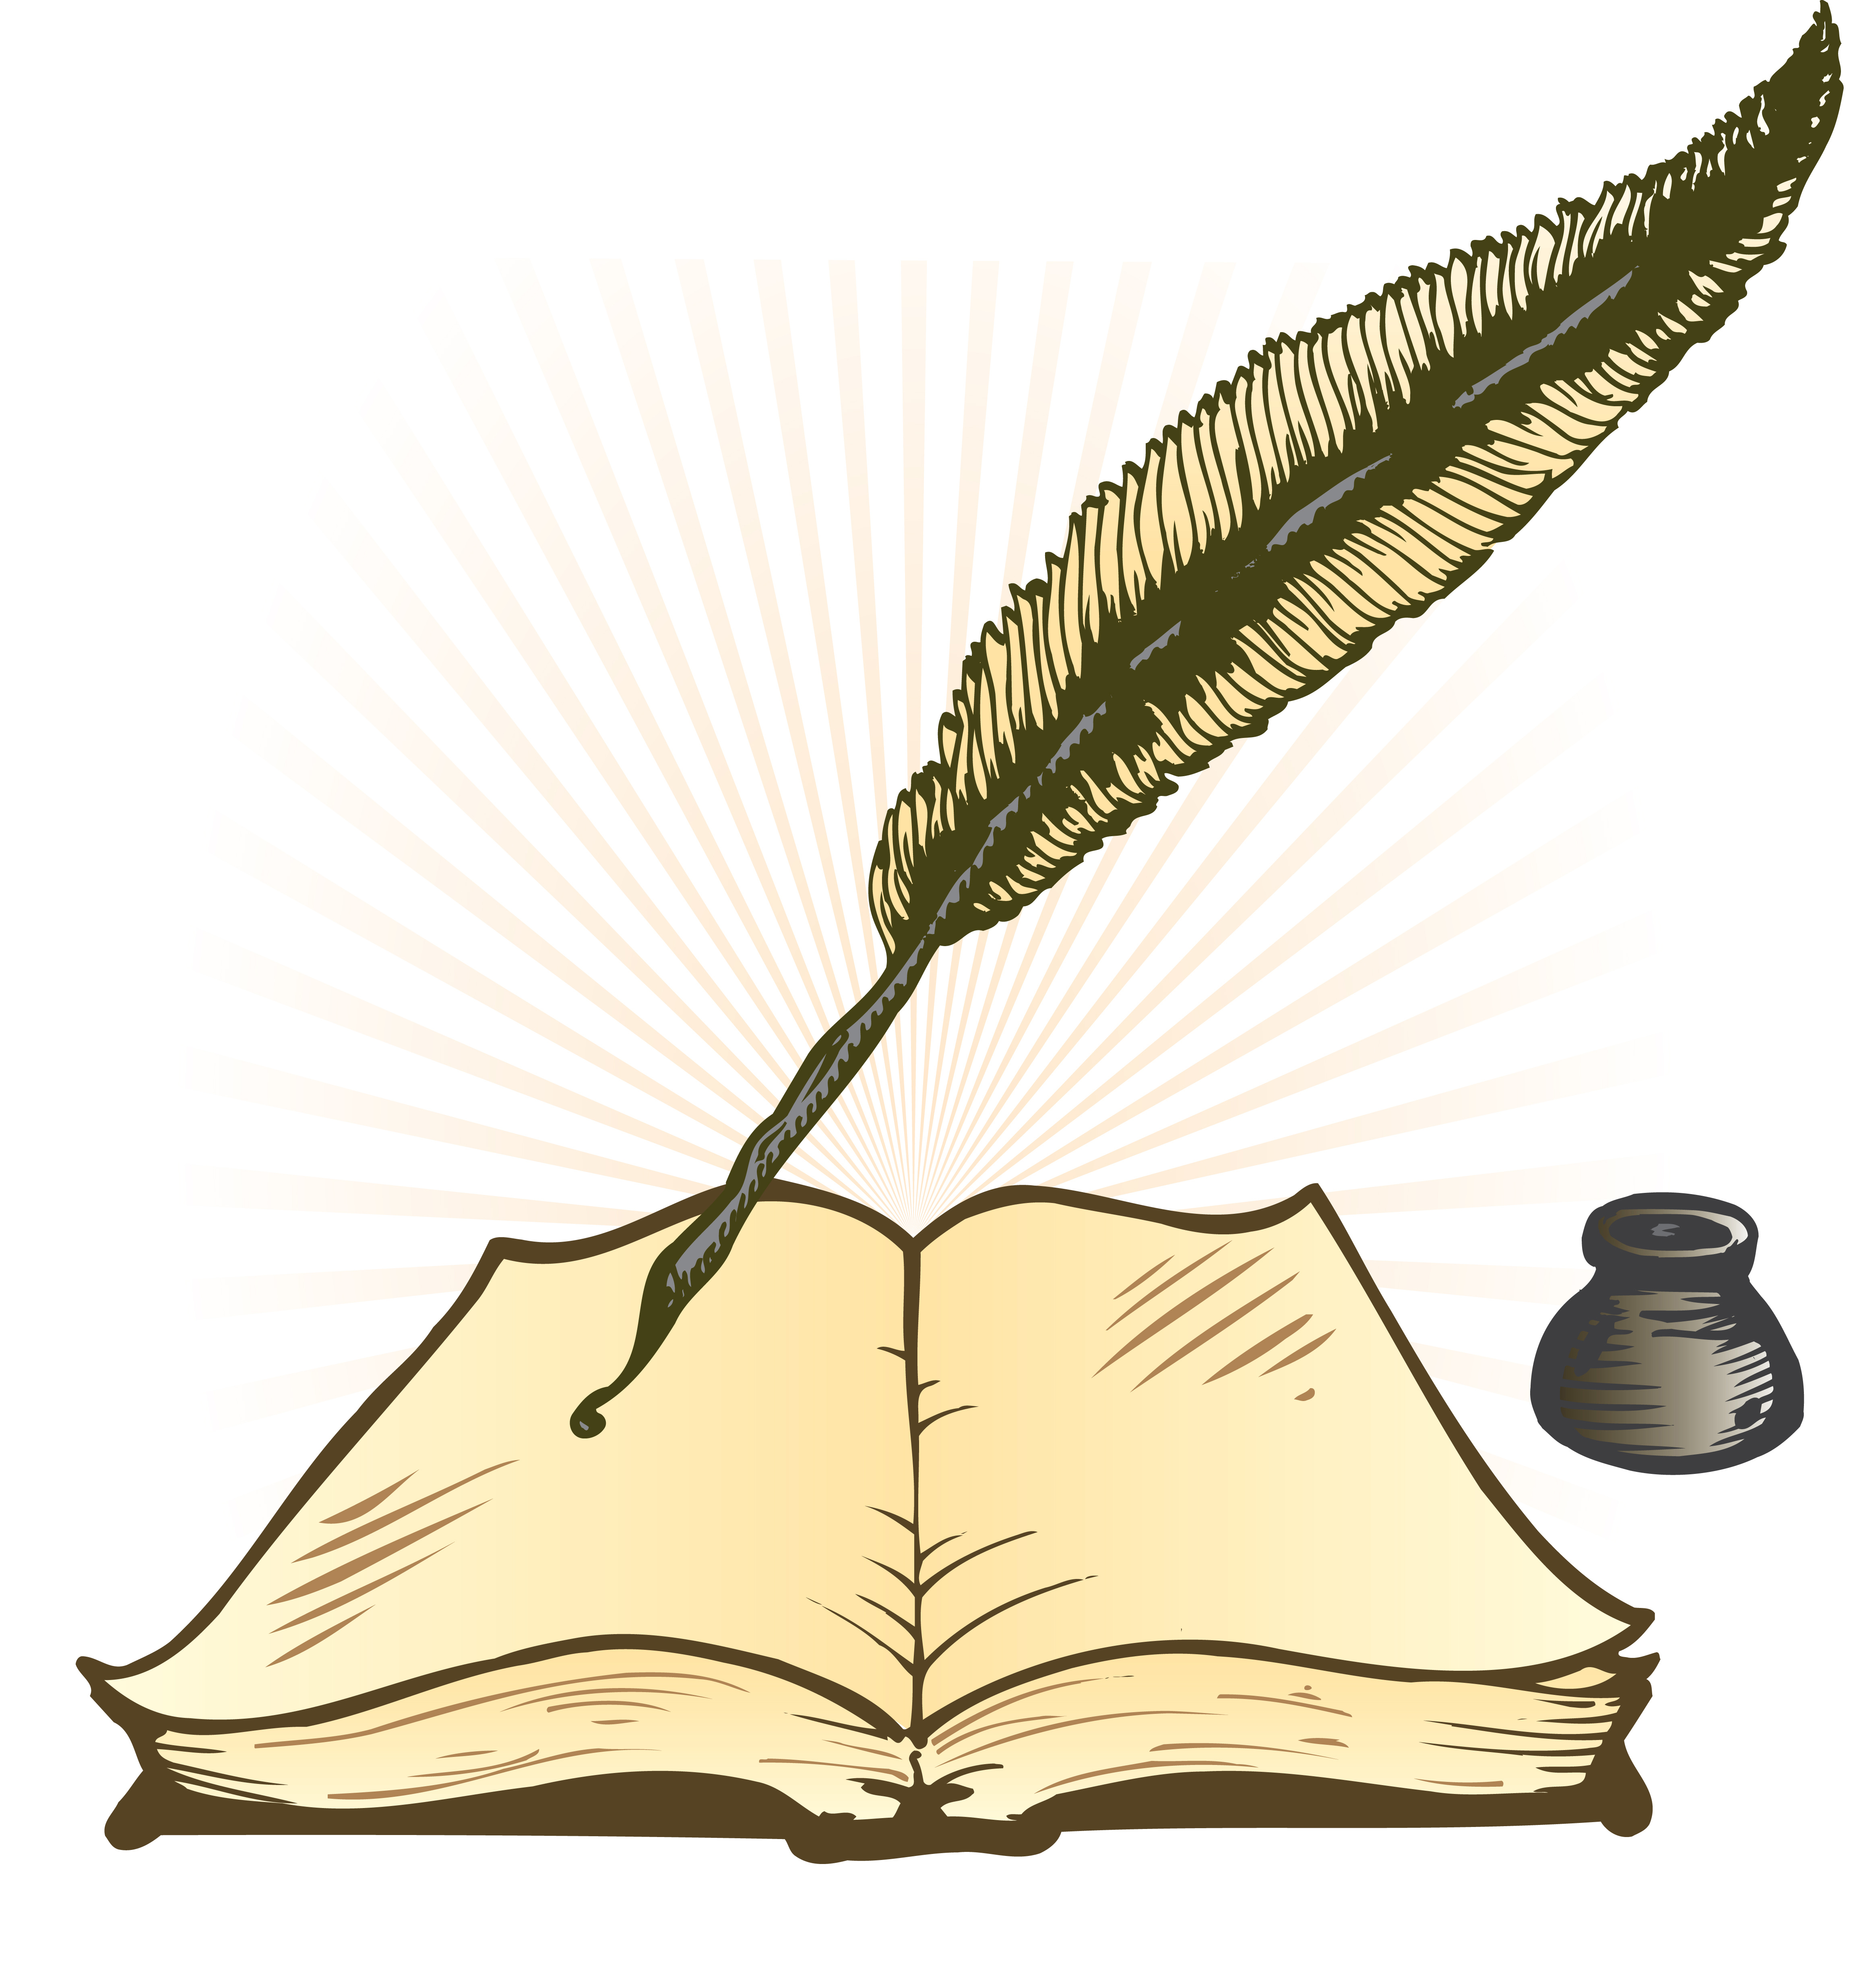 Quill Ink Pot And Open Book Vector Illustration